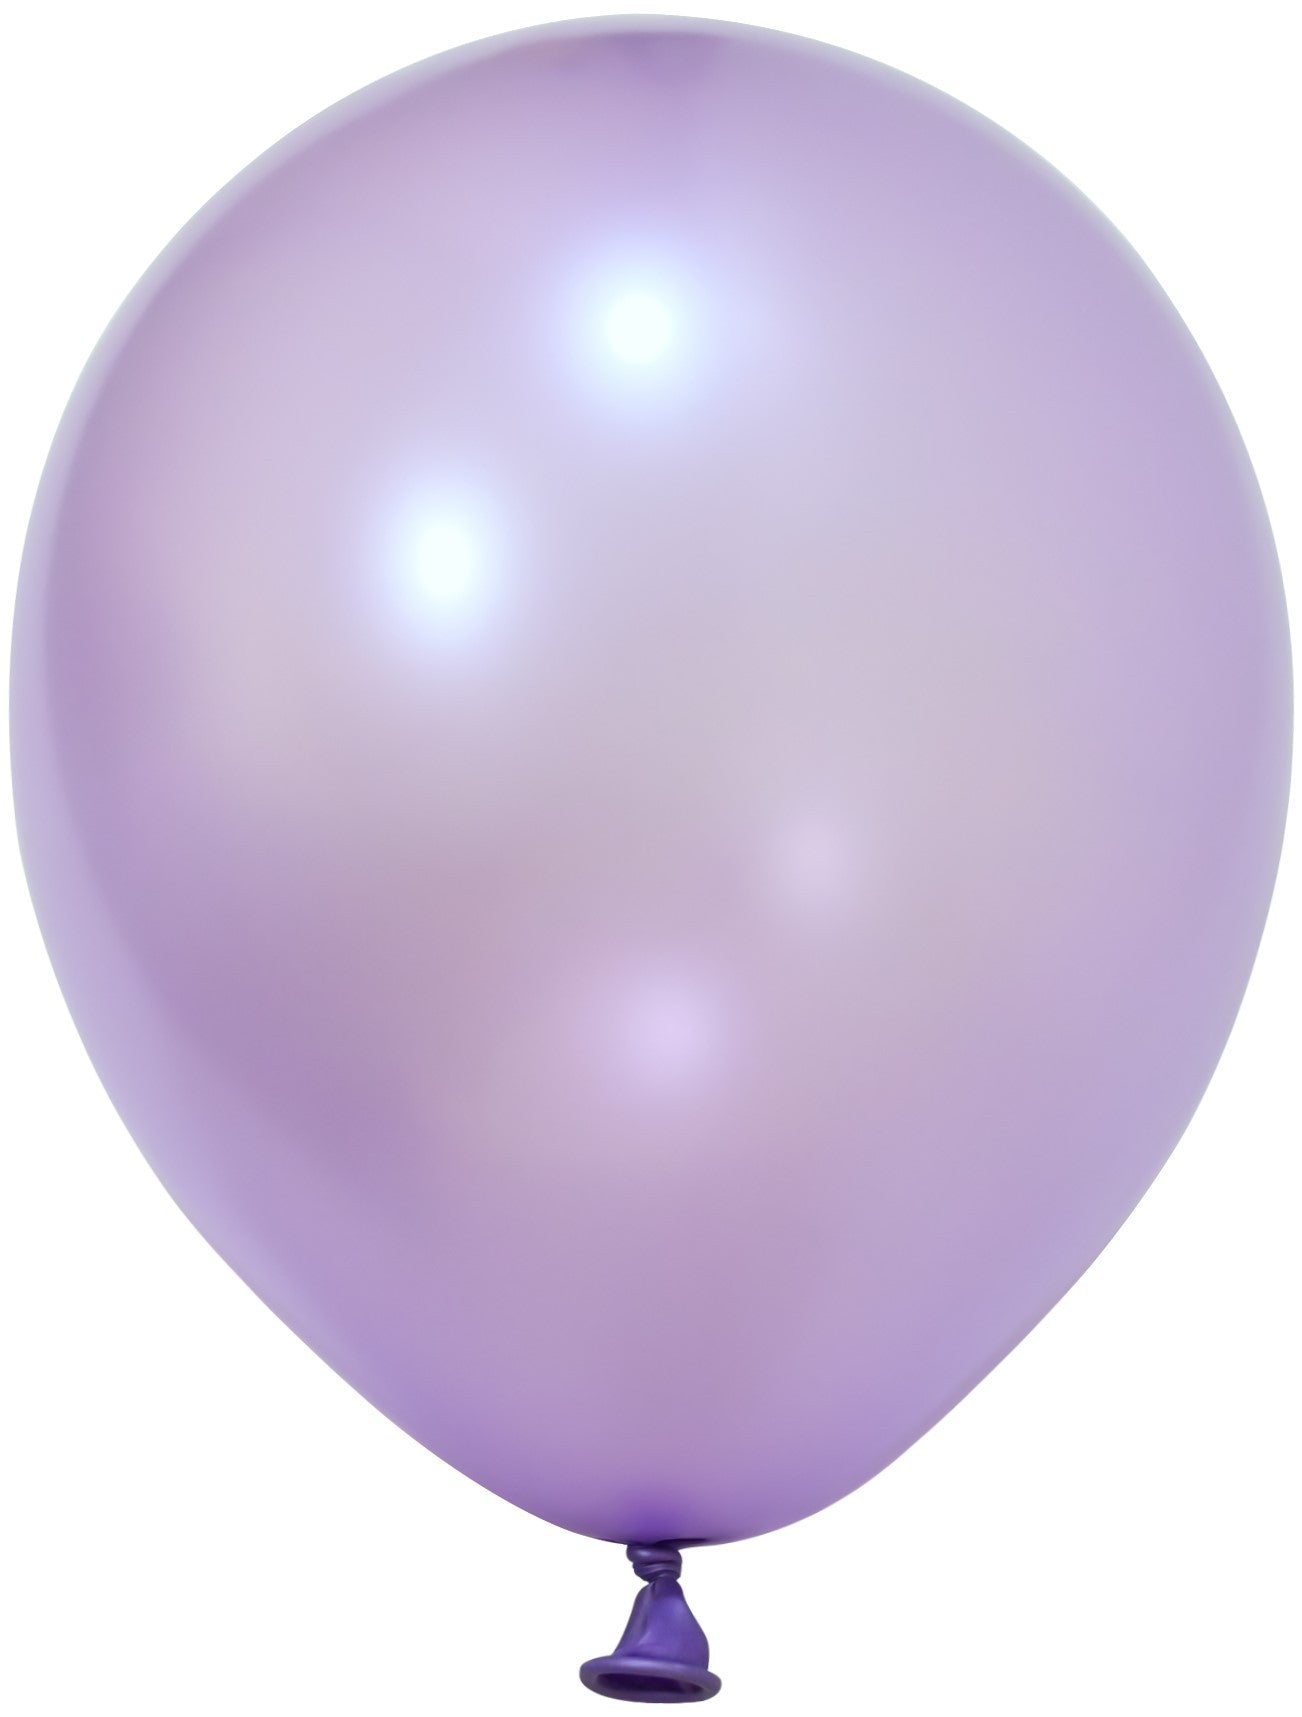 View Light Violet Metallic Latex Balloon 10inch Pack of 100 information